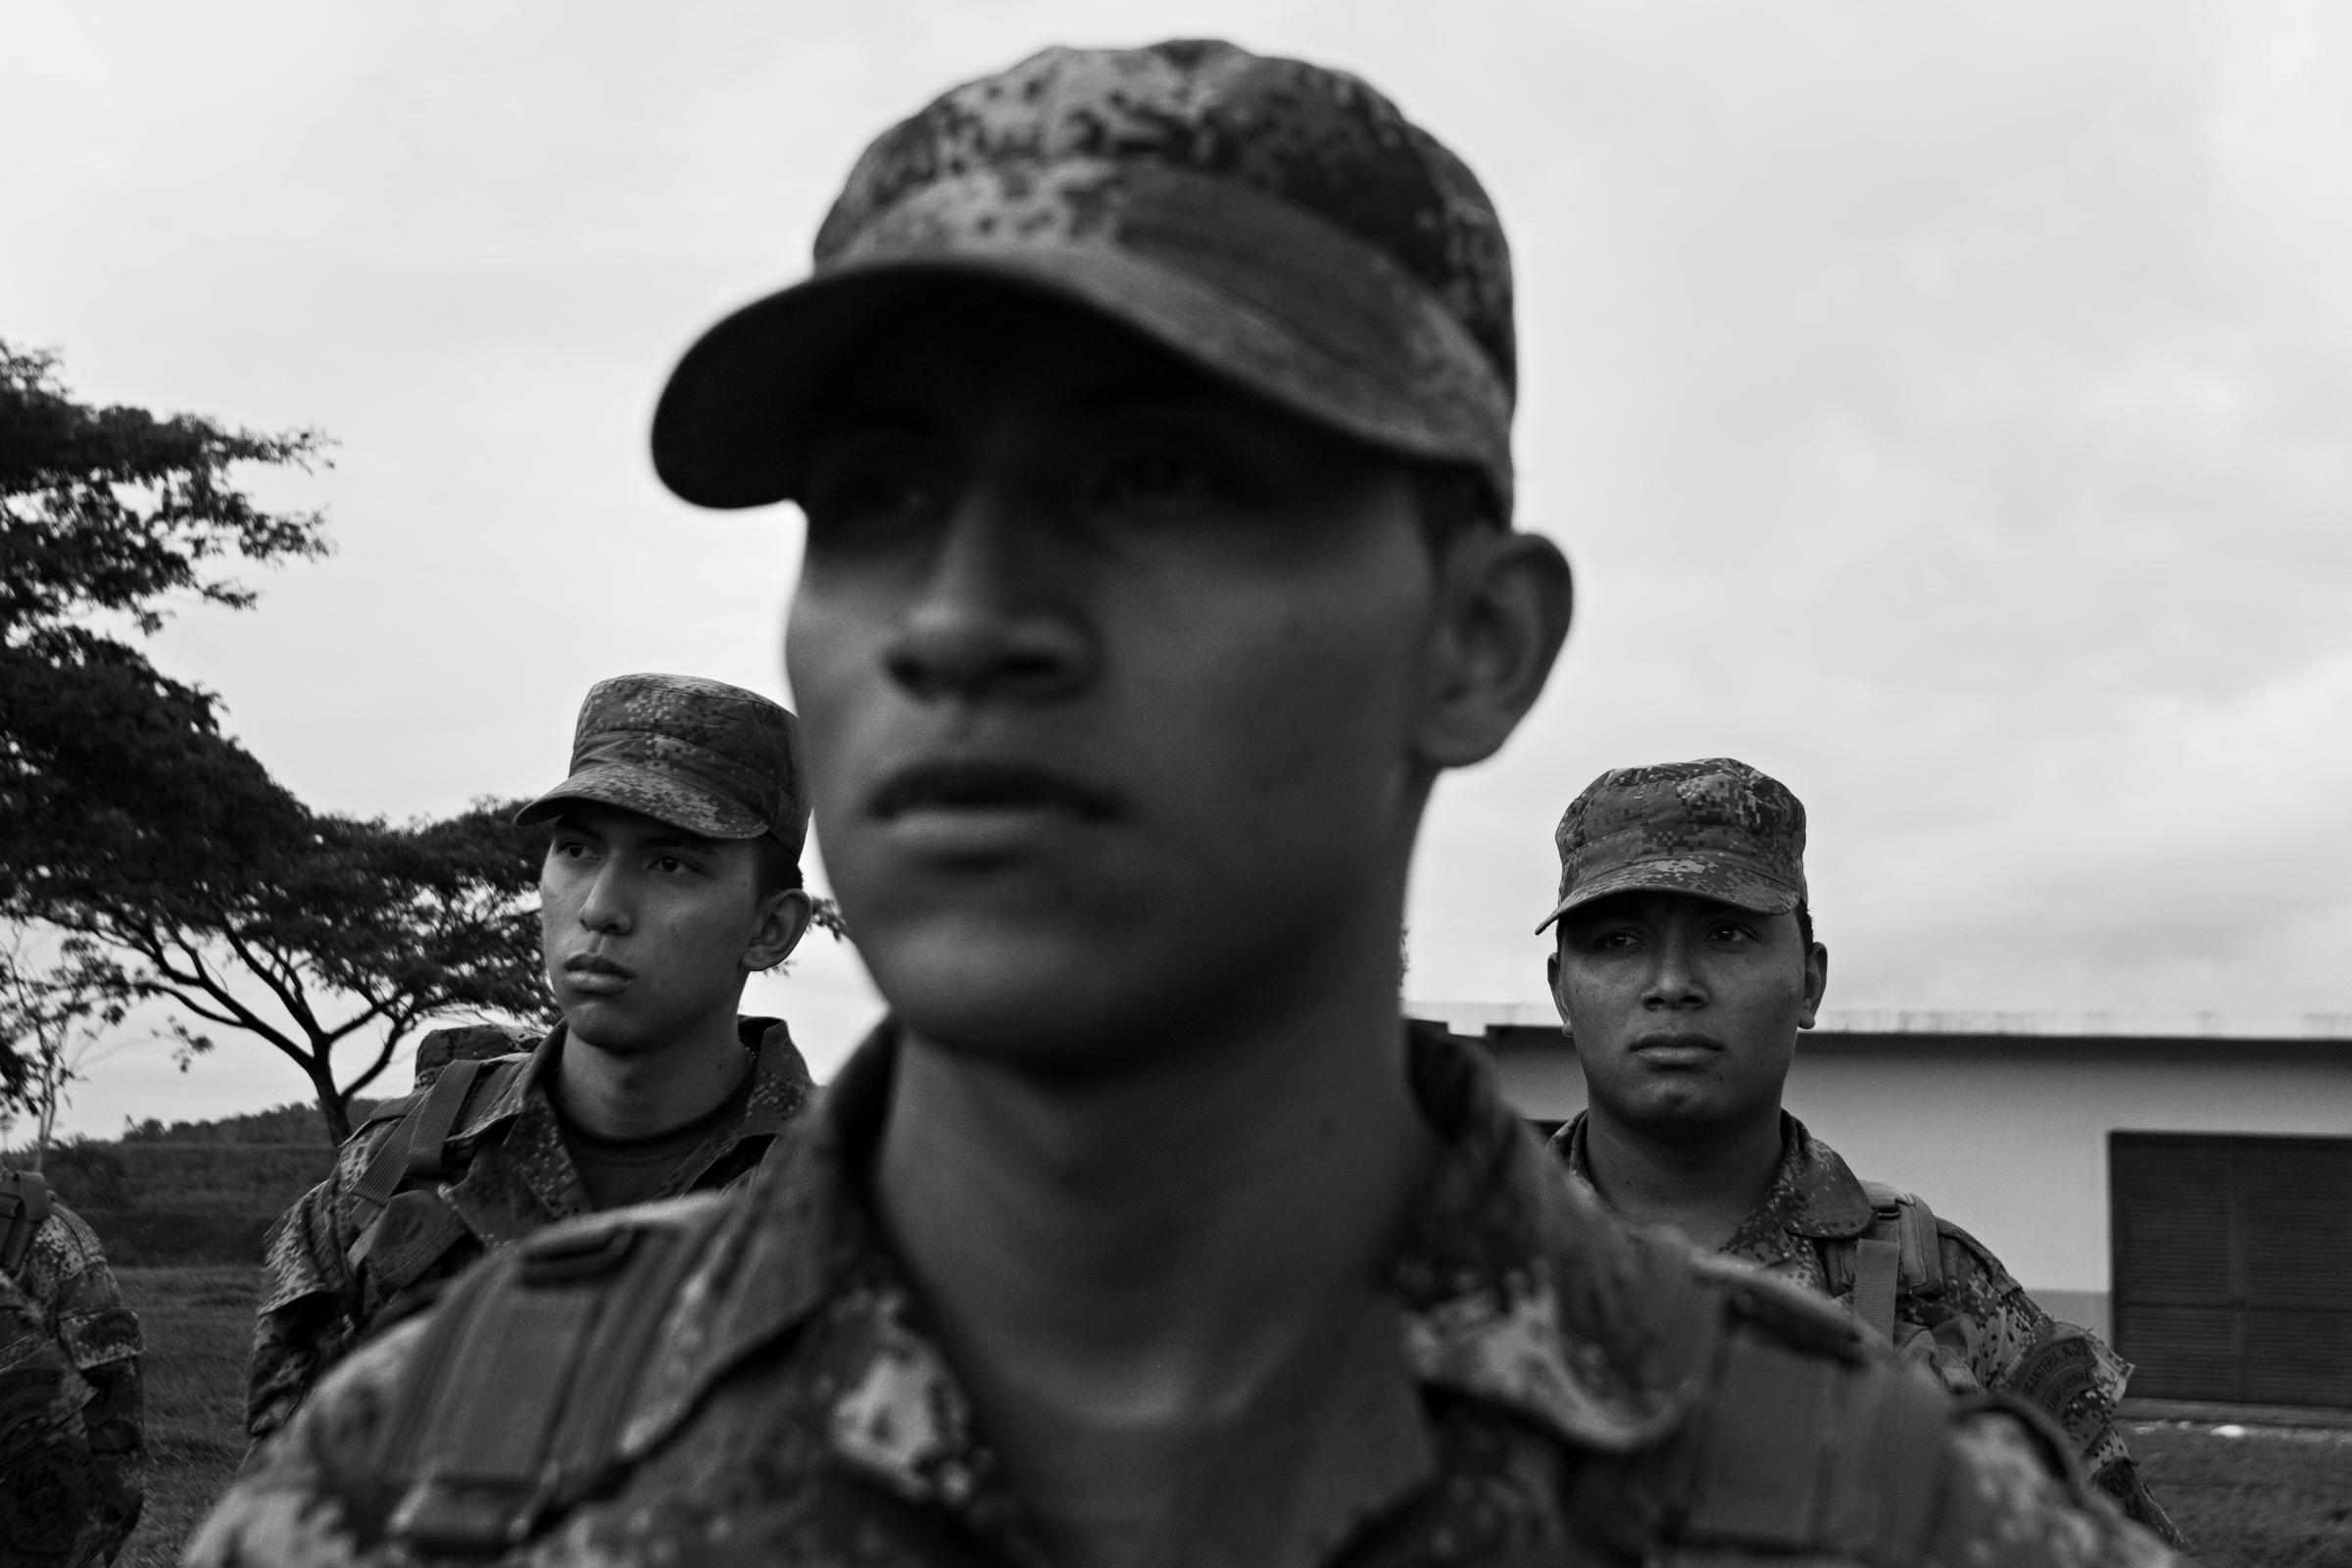 50 years of FARC - Soldiers in formation in La Uribe, Meta, Colombia. ©...